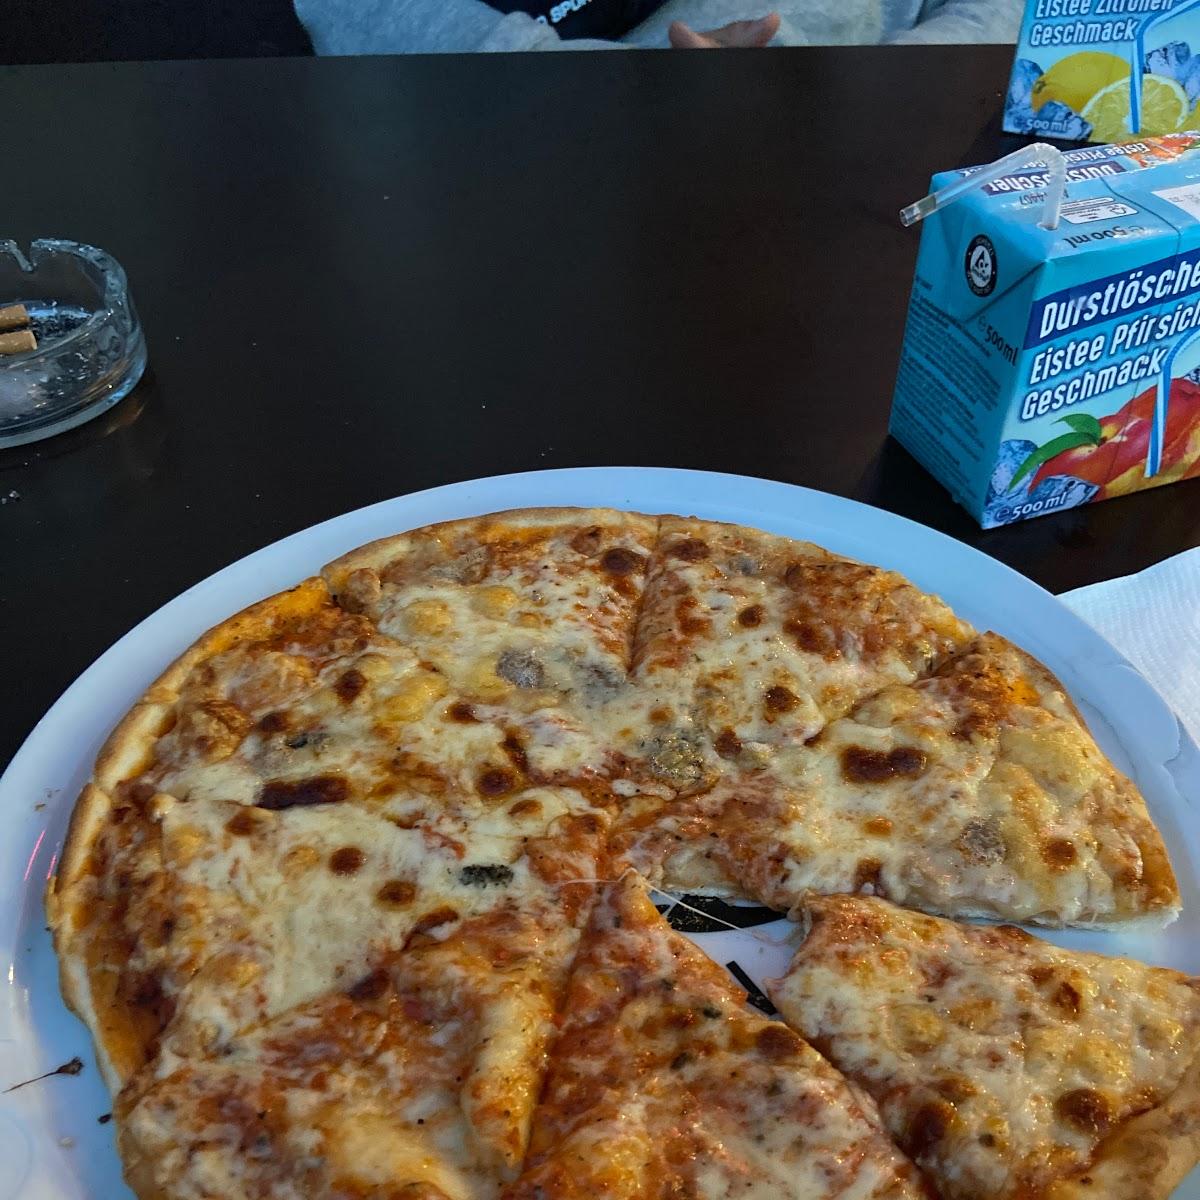 Restaurant "Maxi Pizza Heimservice" in Olching